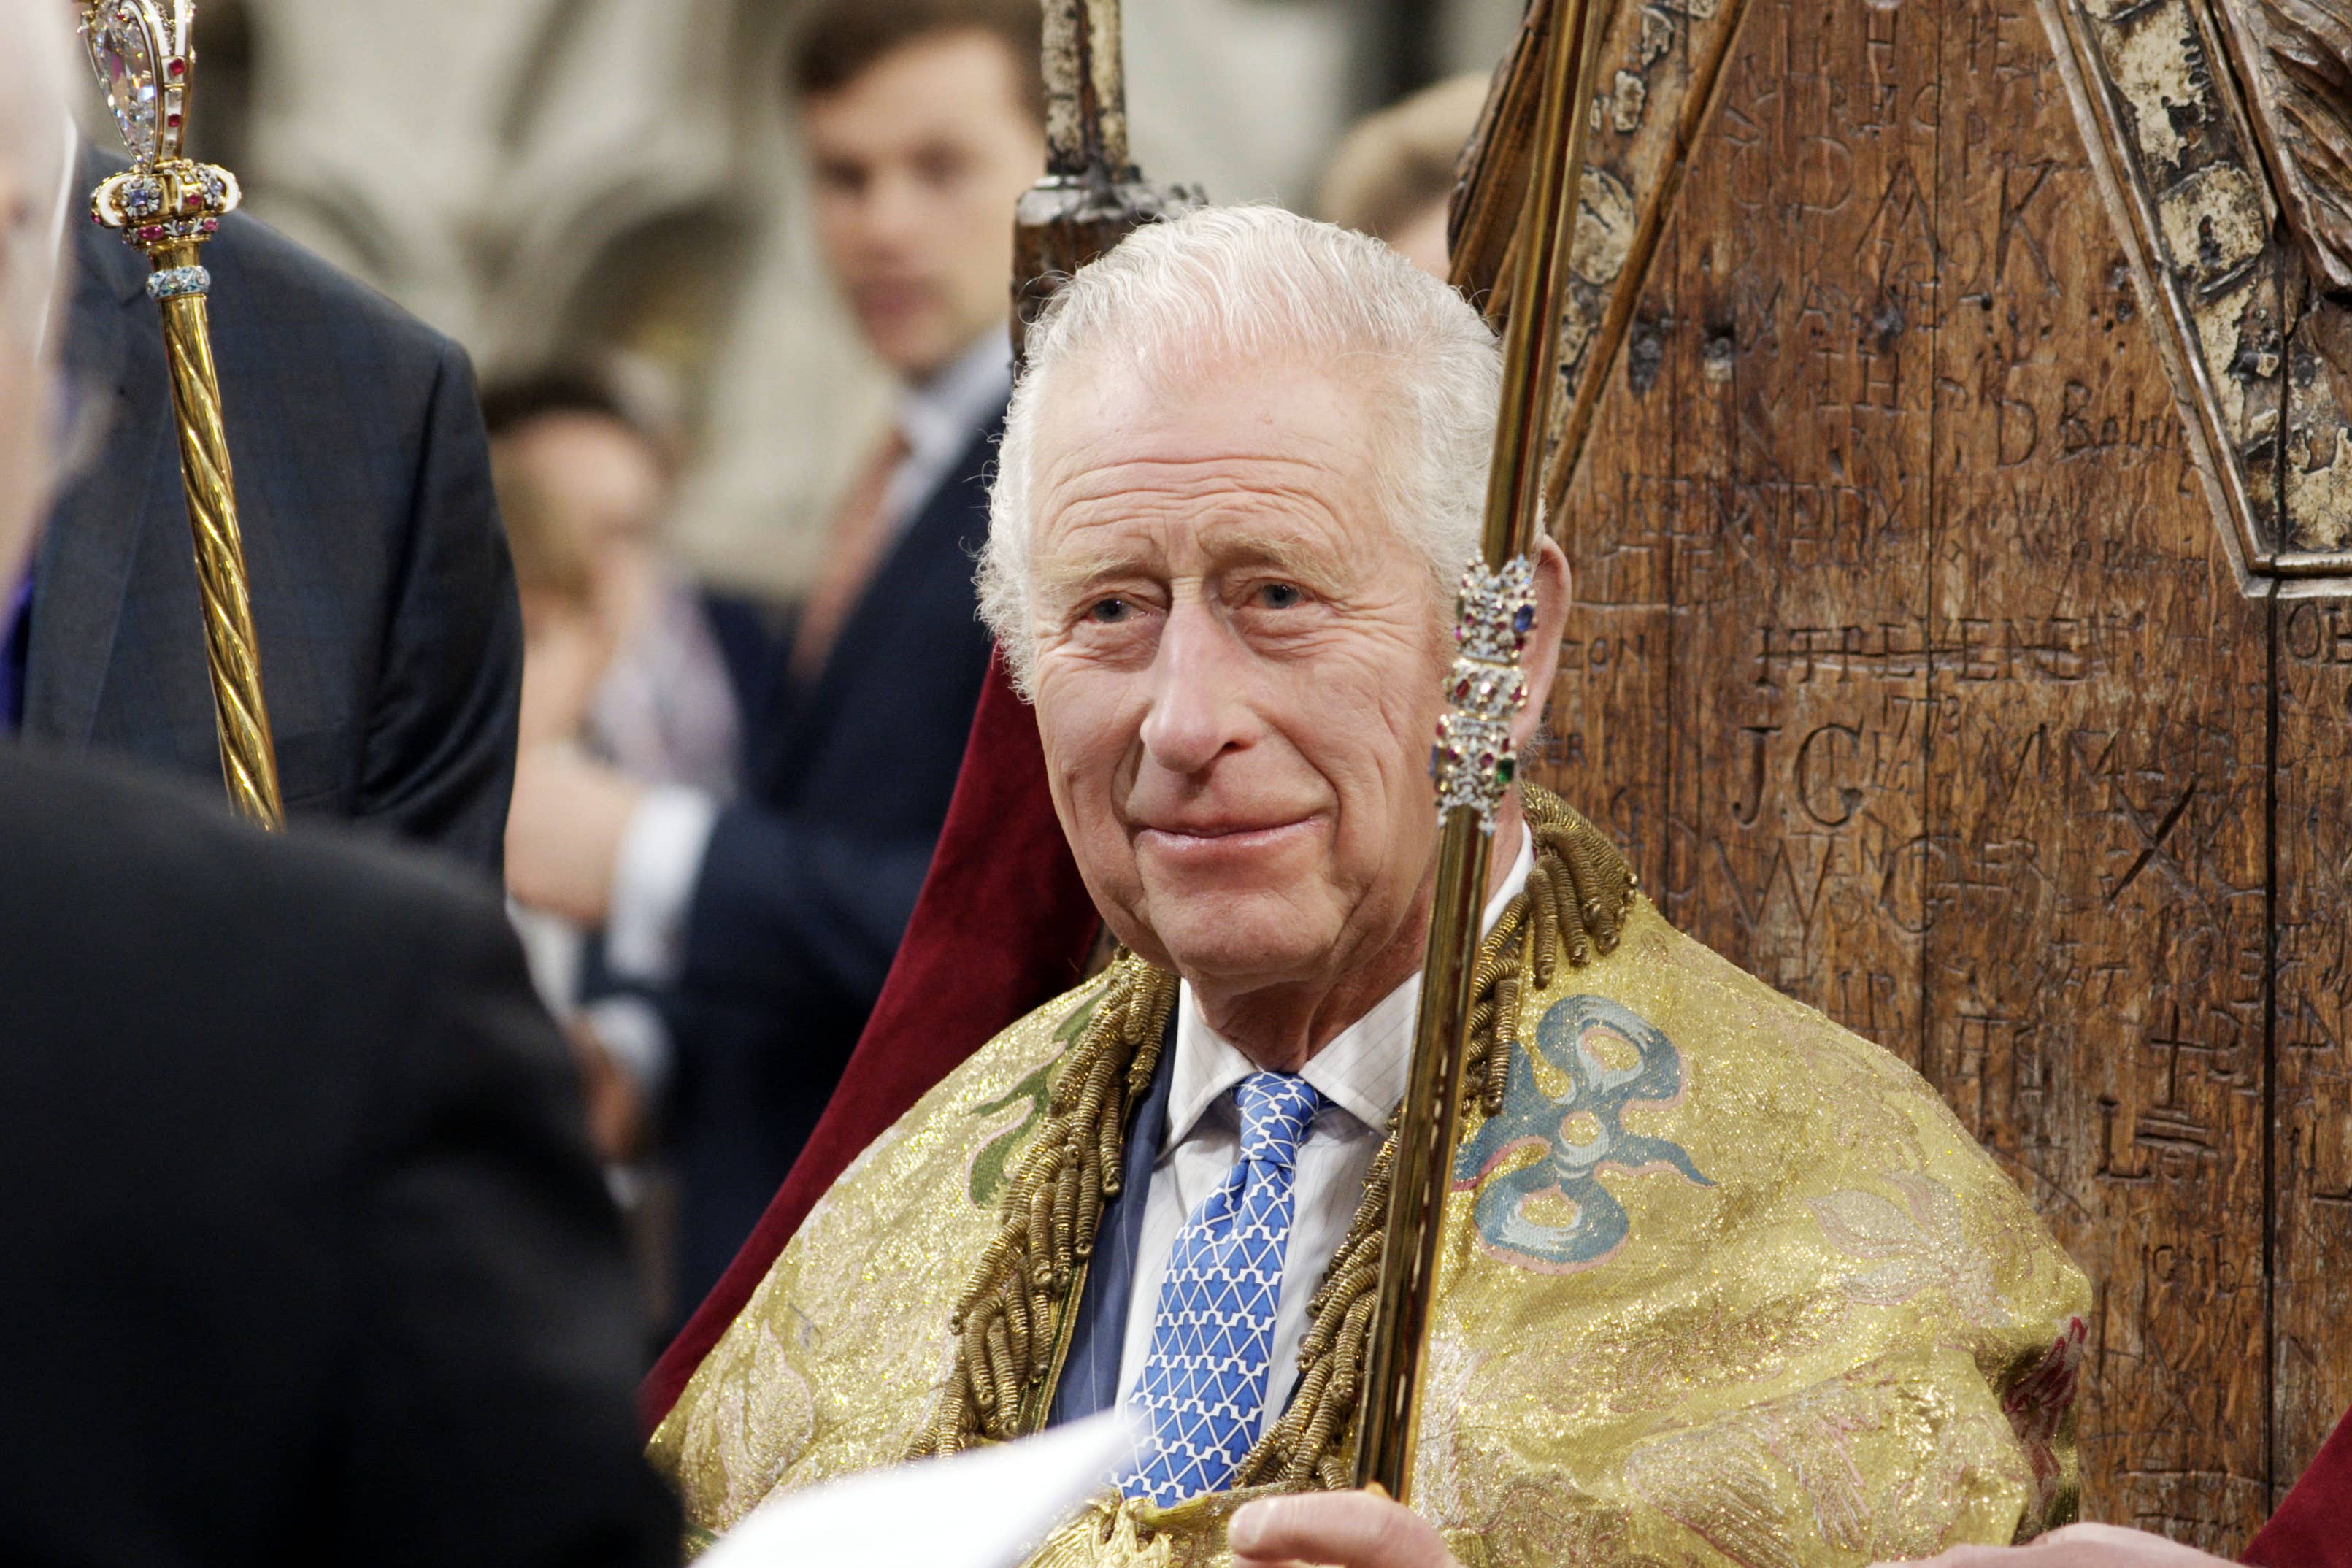 pa ready, charles iii, camilla, helena bonham carter, archbishop, westminster abbey, buckingham palace, oxford, cenotaph, royal ascot, canterbury, netflix, bbc film to show ‘extraordinary behind-the-scenes’ footage of king’s first year